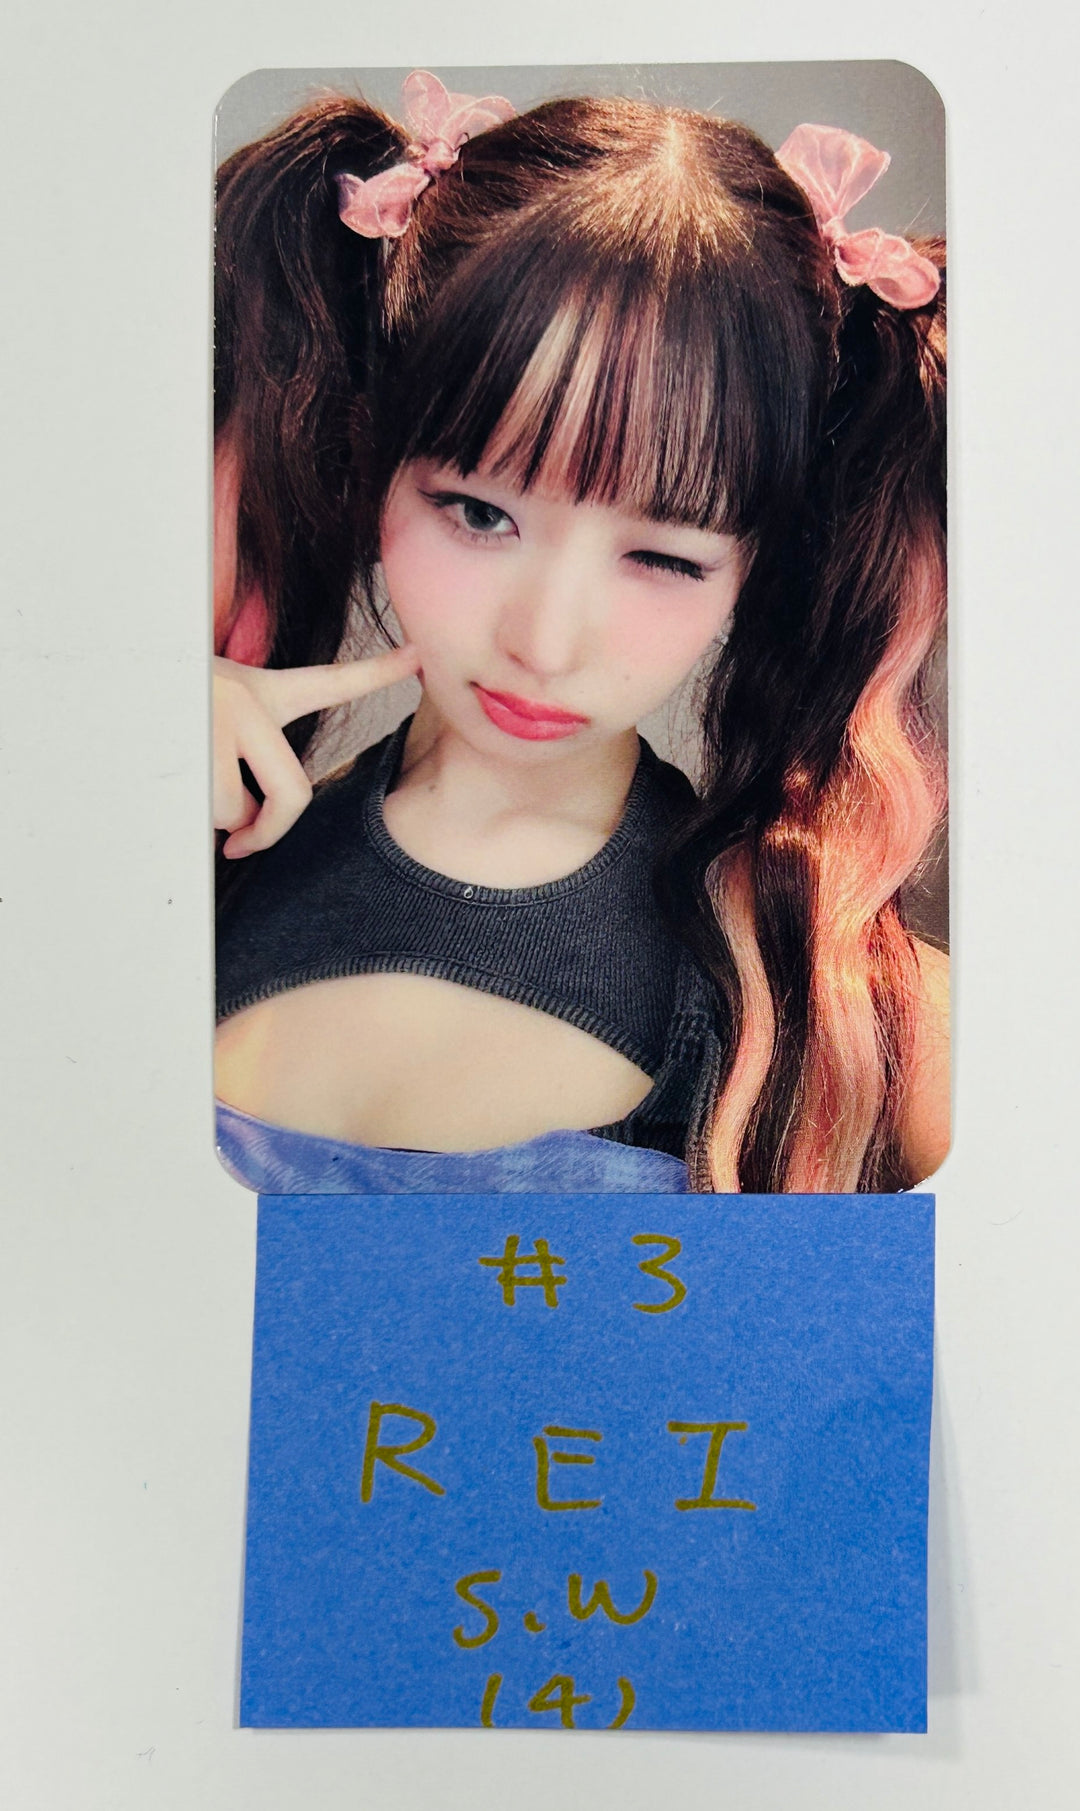 IVE "IVE Switch" - Soundwave Fansign Event Photocard Round 2 [24.6.10]